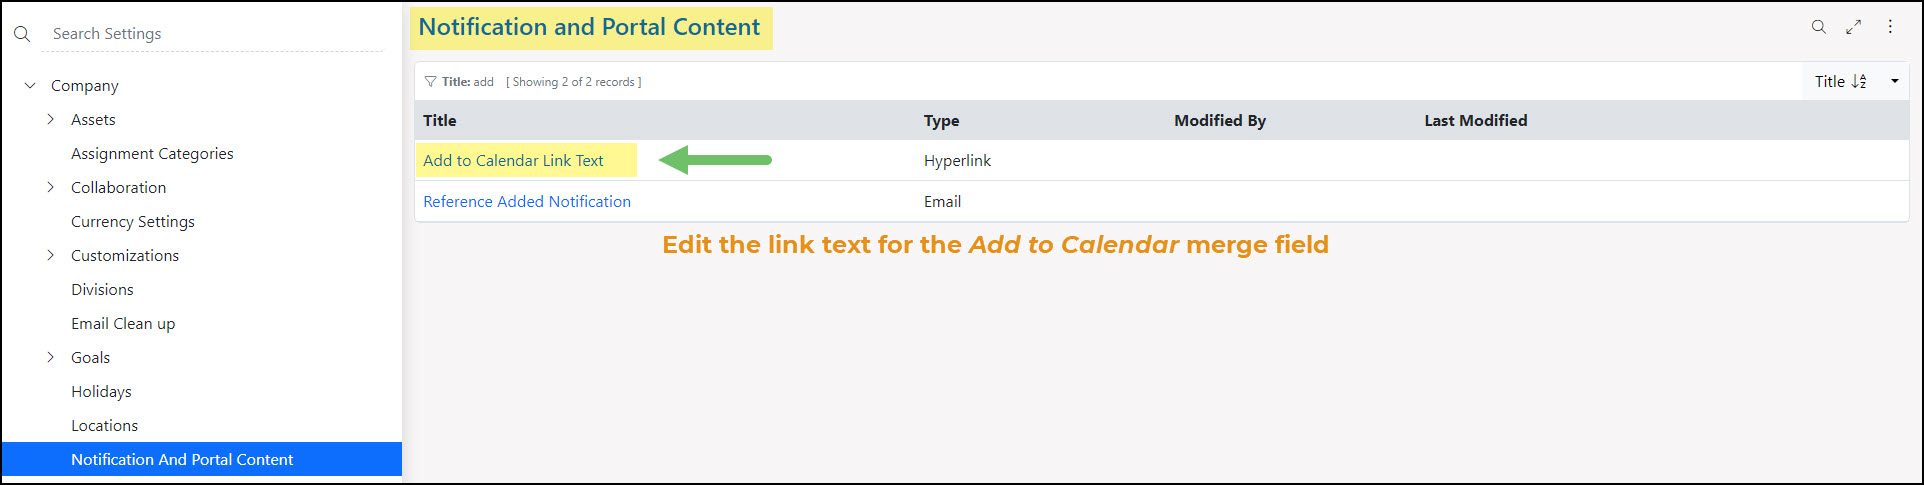 Image reminder to add the Calendar Link to this Add to Calendar Notification and Portal Content 